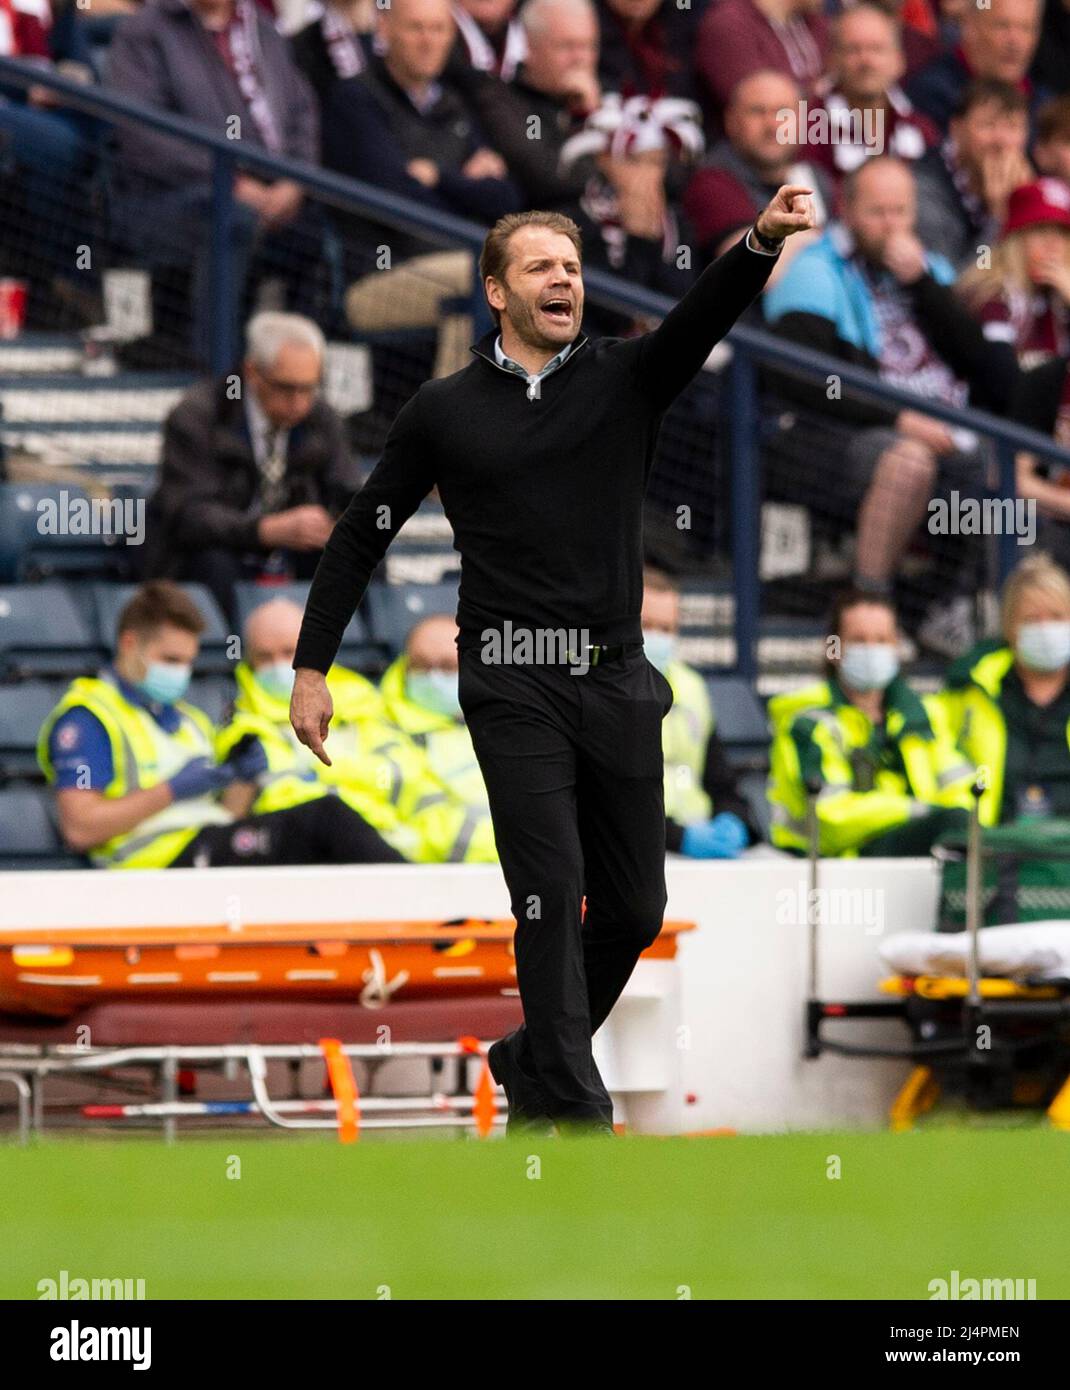 Glasgow, UK. 07th Apr, 2022. Scottish Cup semi final - Heart of Midlothian FC v Hibernian FC 07/04/2022 Pic shows: Hearts' manager, Robbie Neilson shouts instructions to his team as Hearts take on Hibs in the Scottish Cup semi final at Hampden Park, Glasgow Credit: Ian Jacobs/Alamy Live News Stock Photo